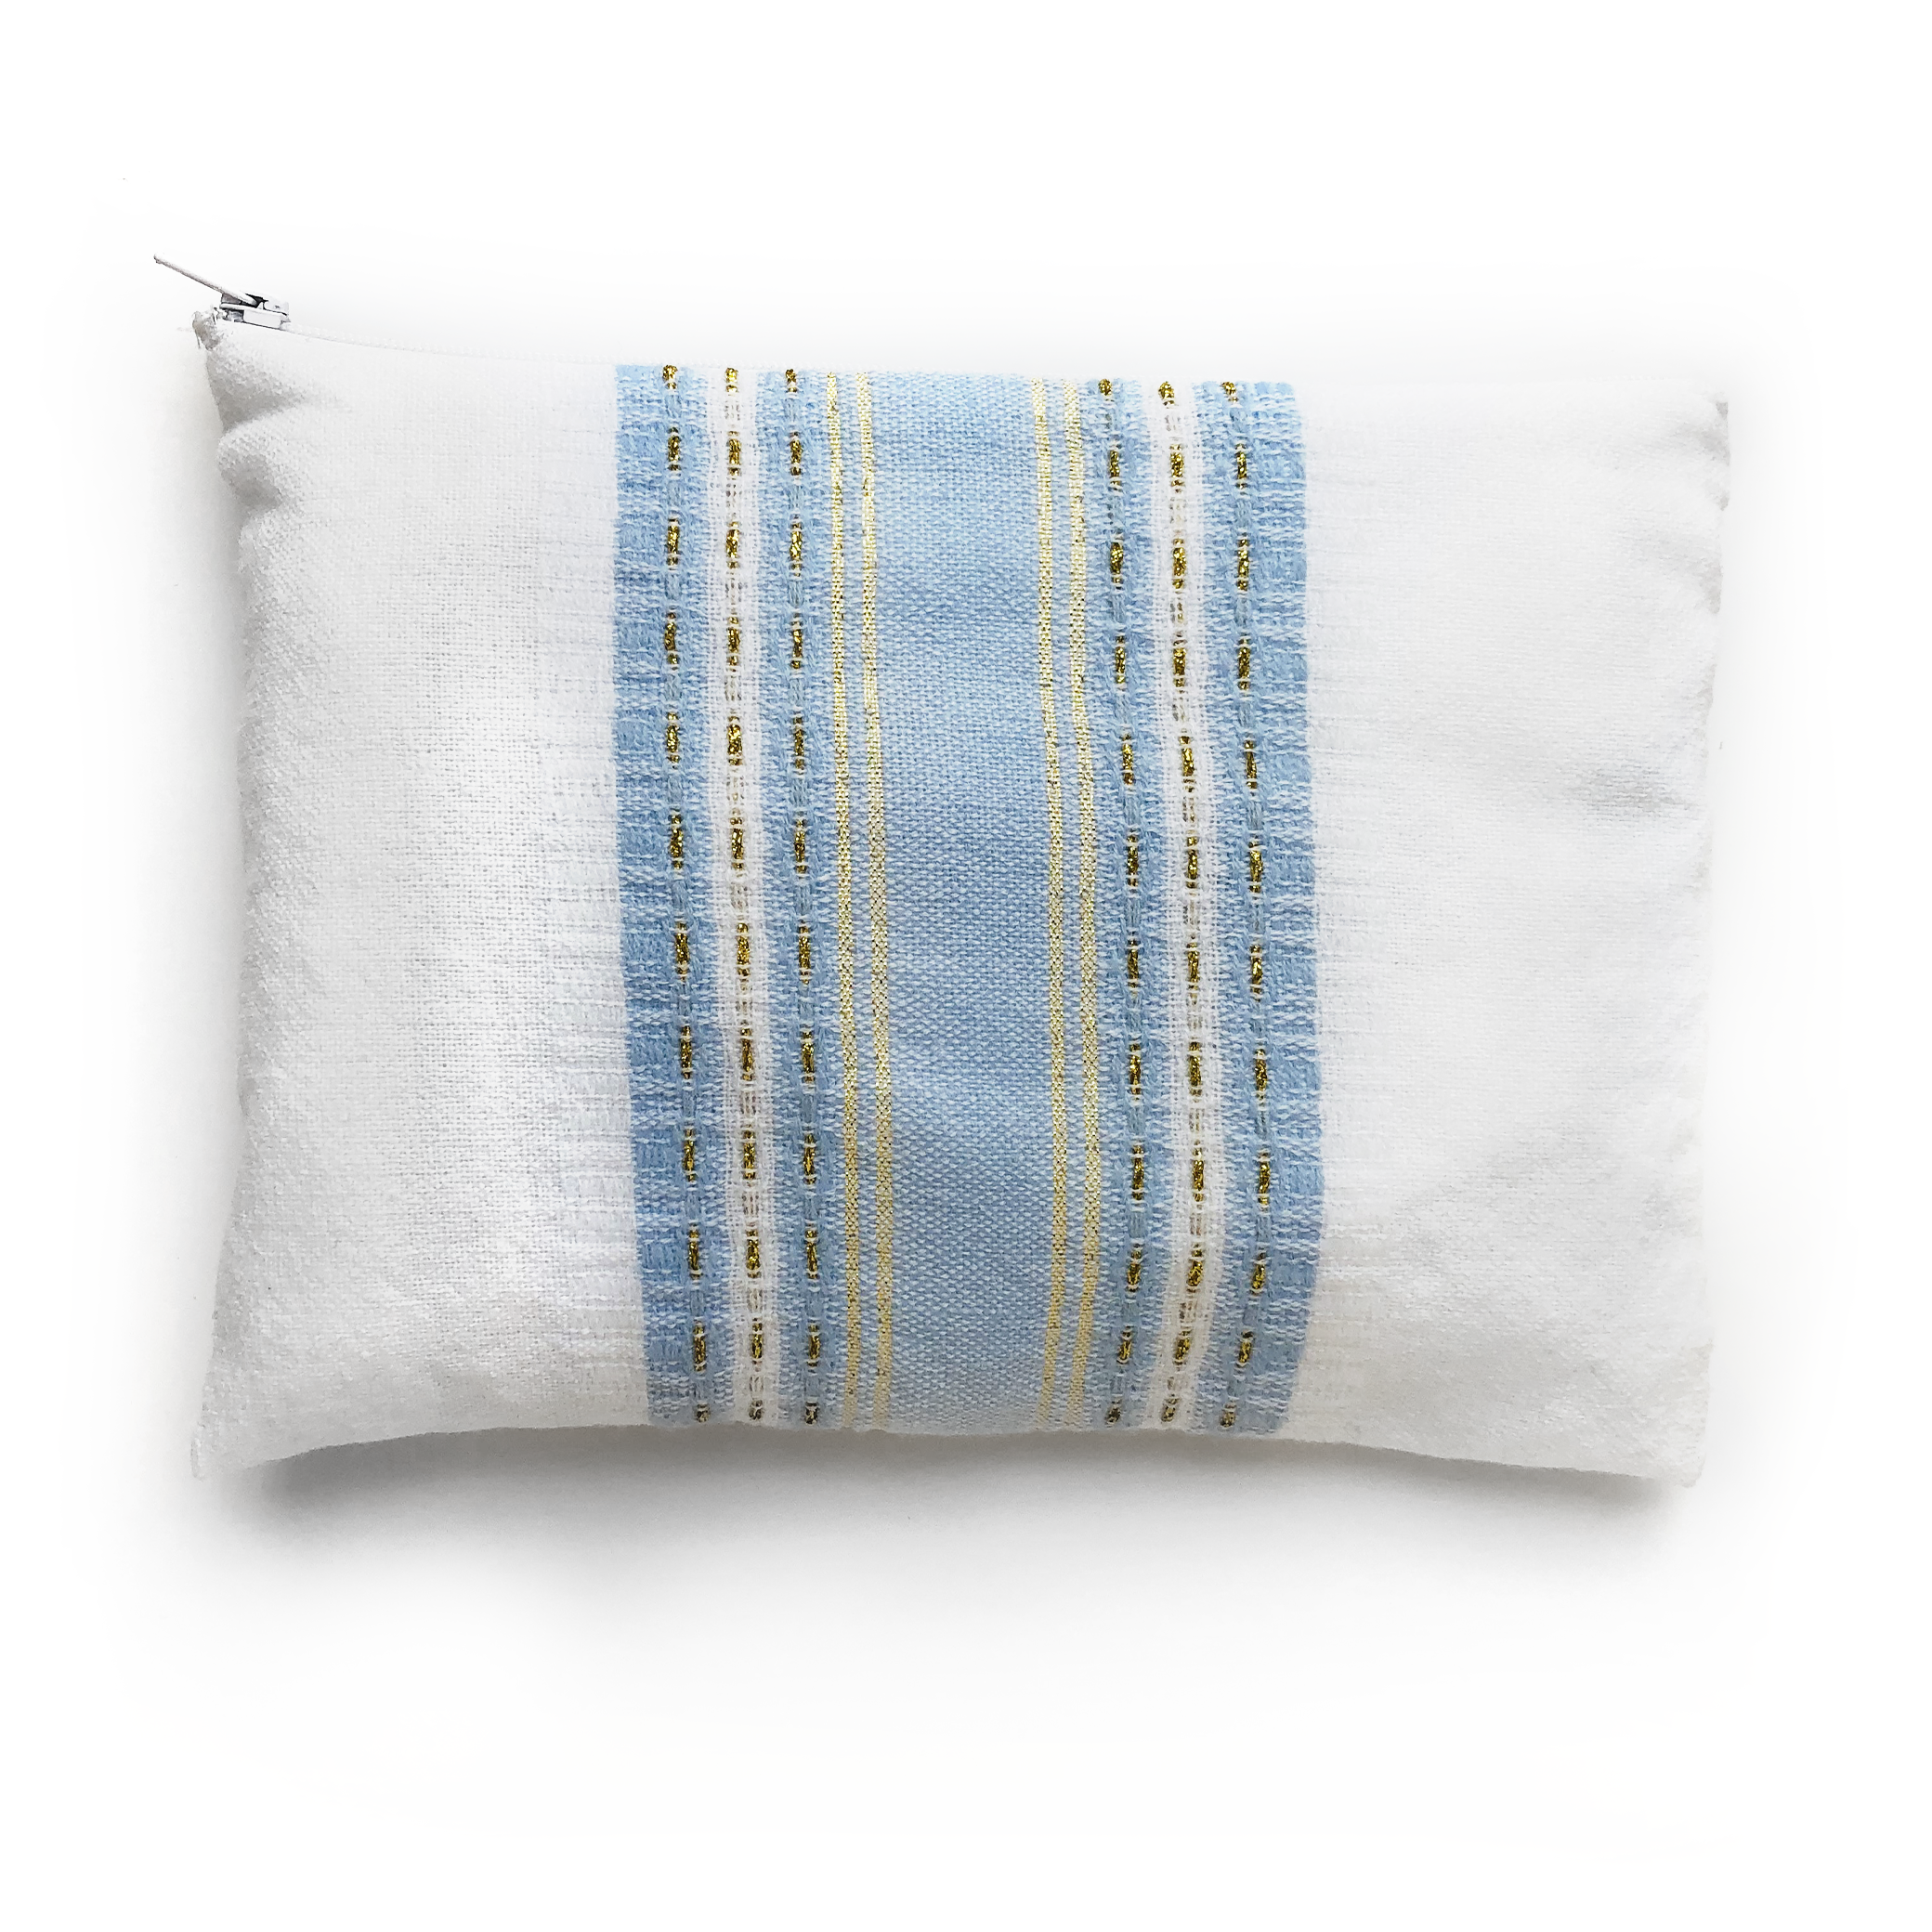 Samuel - Wool Tallit - Baby Blue with Gold on White